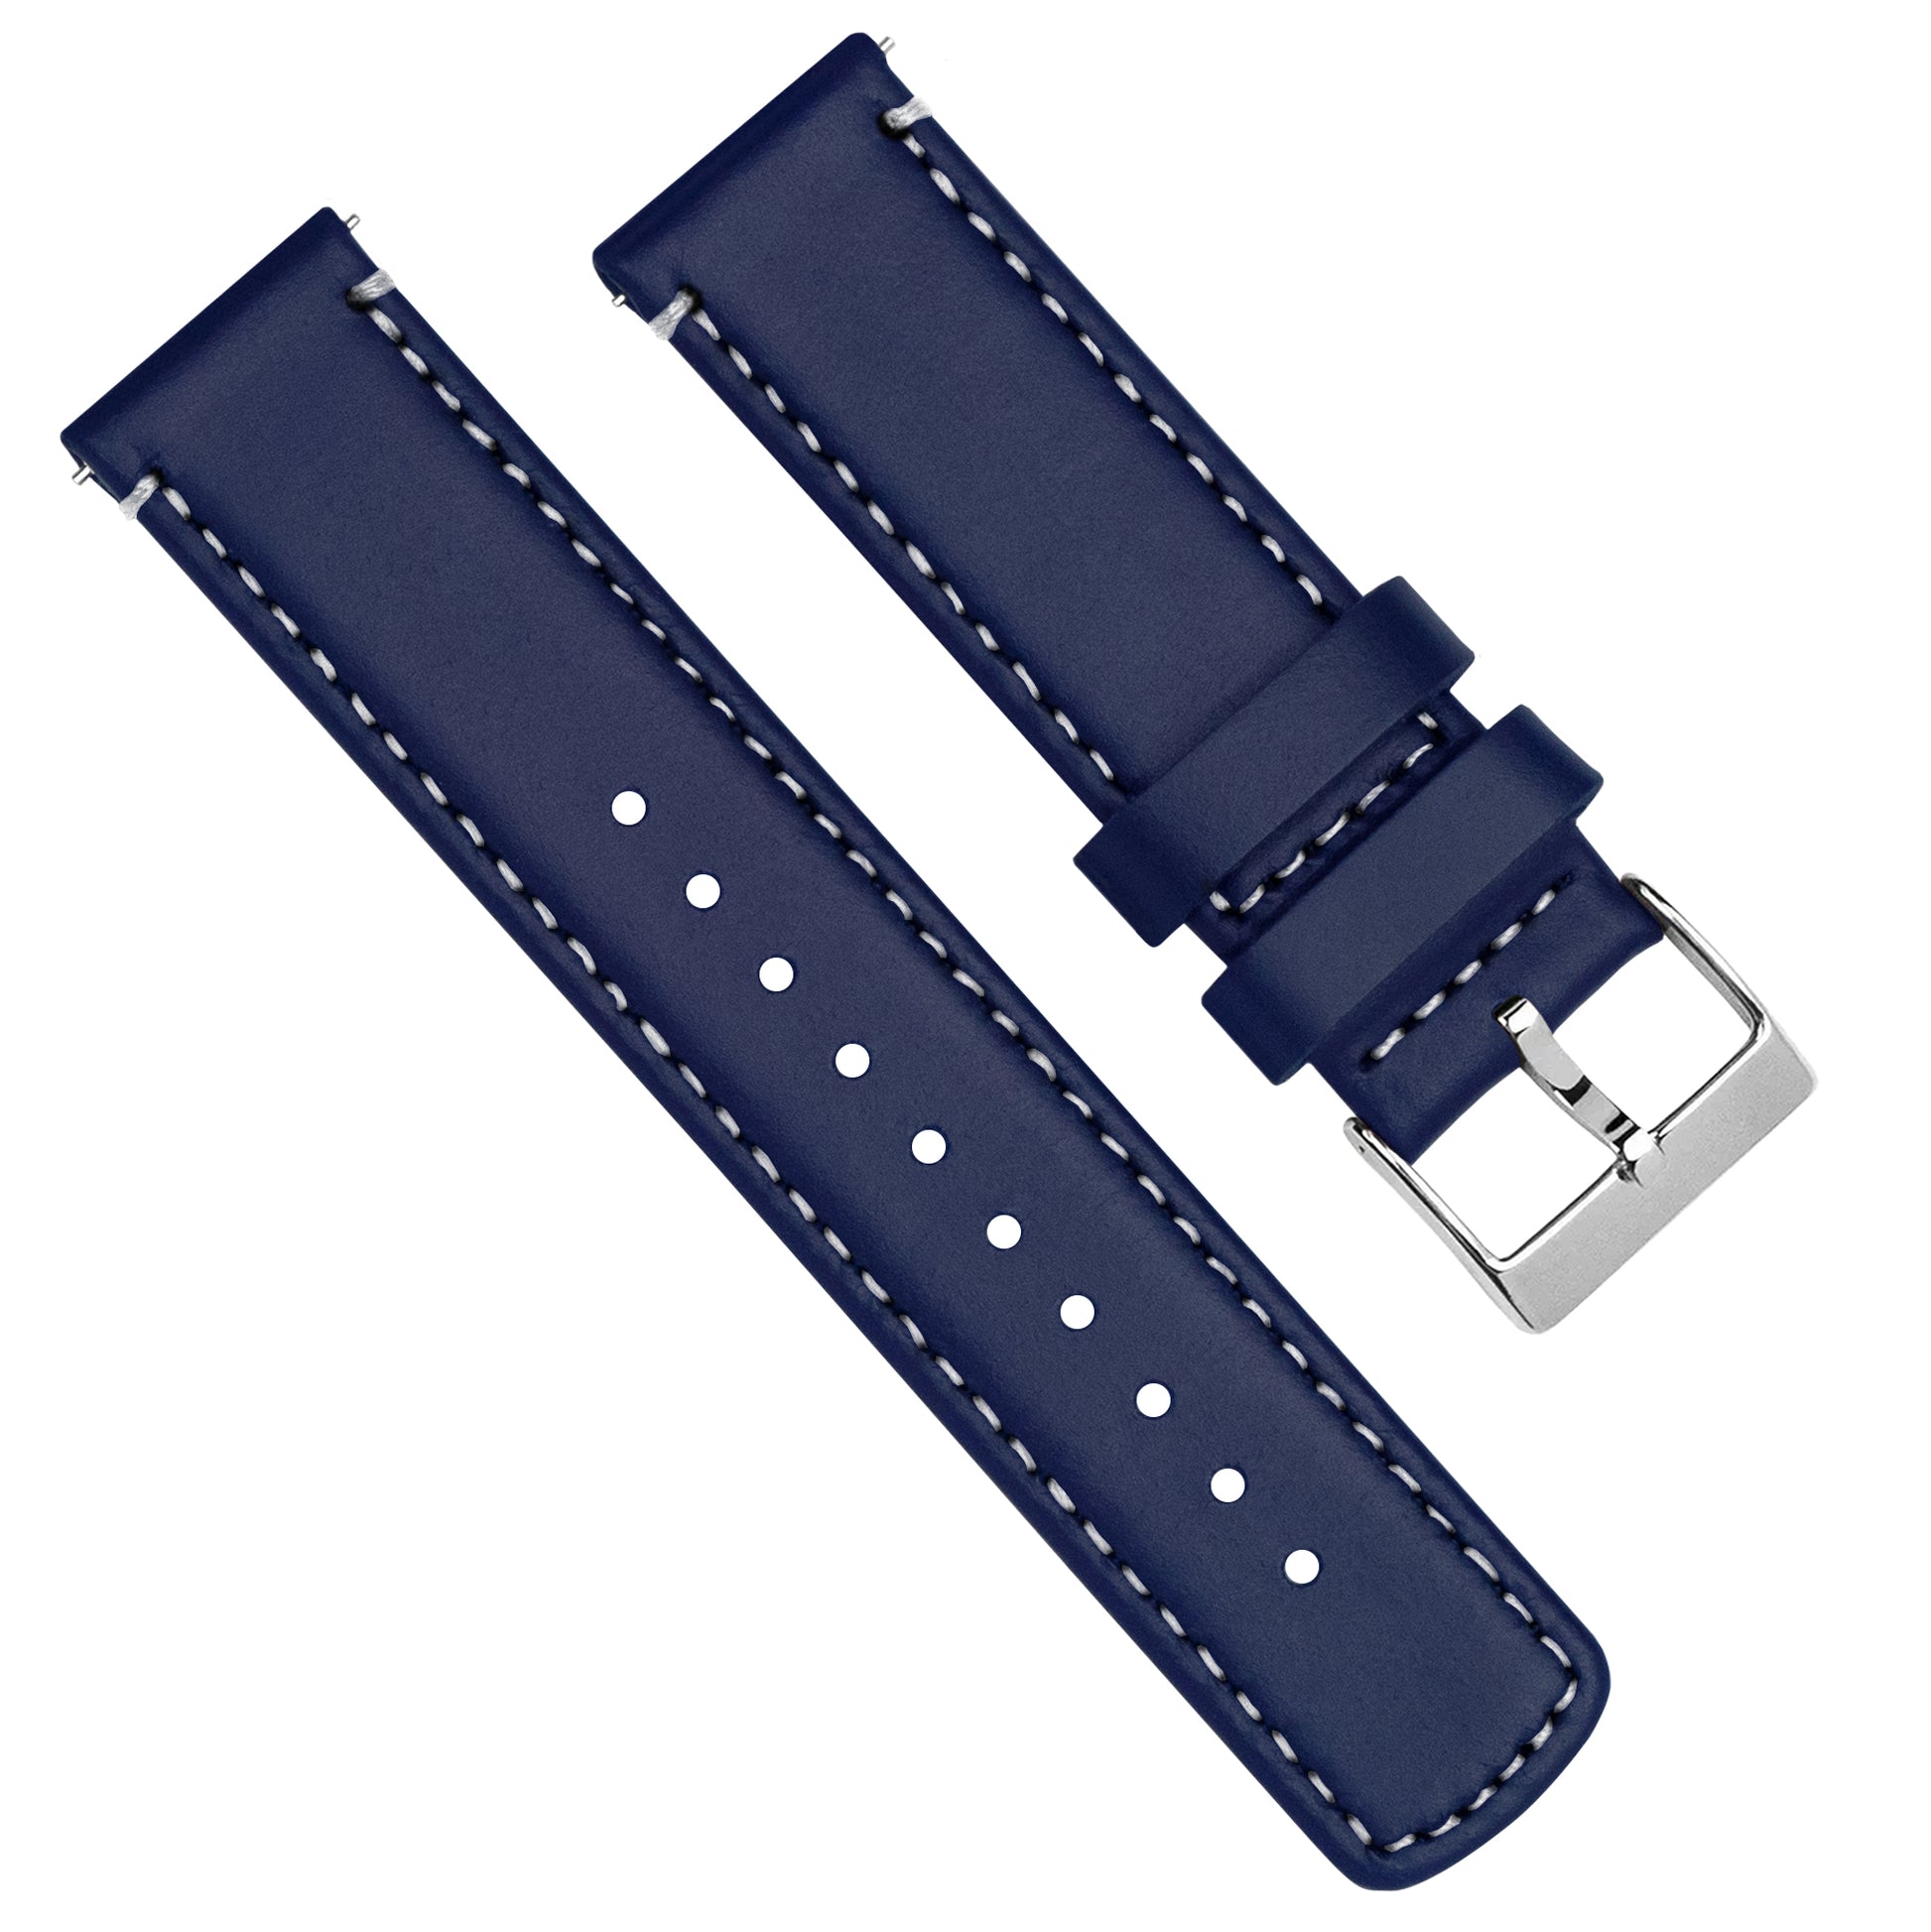 Fossil Gen 5 | Navy Blue Leather & White Stitching - Barton Watch Bands